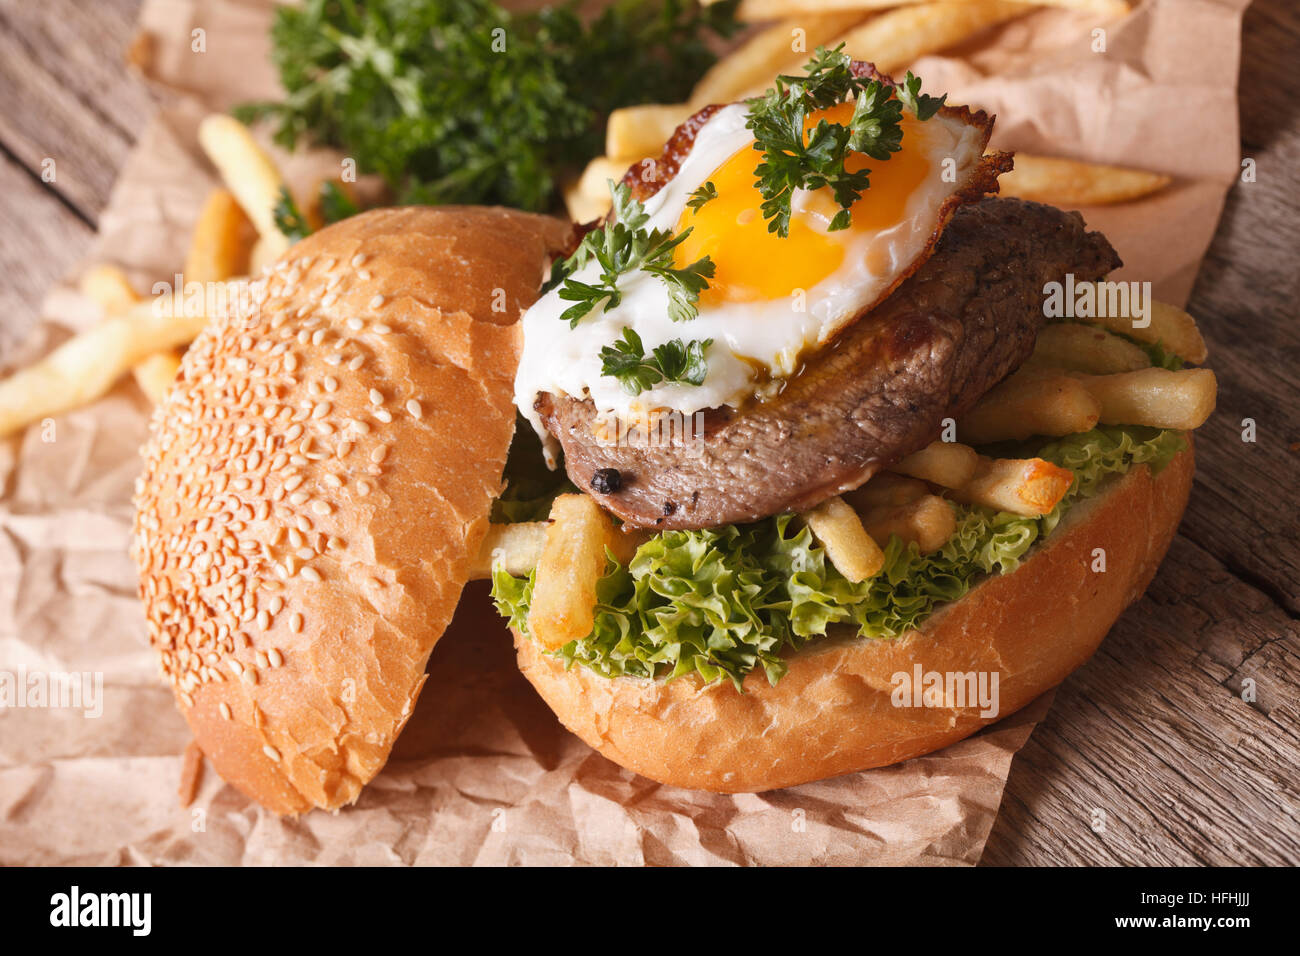 Sandwich with beefsteak, fried egg and French fries close-up. Horizontal Stock Photo